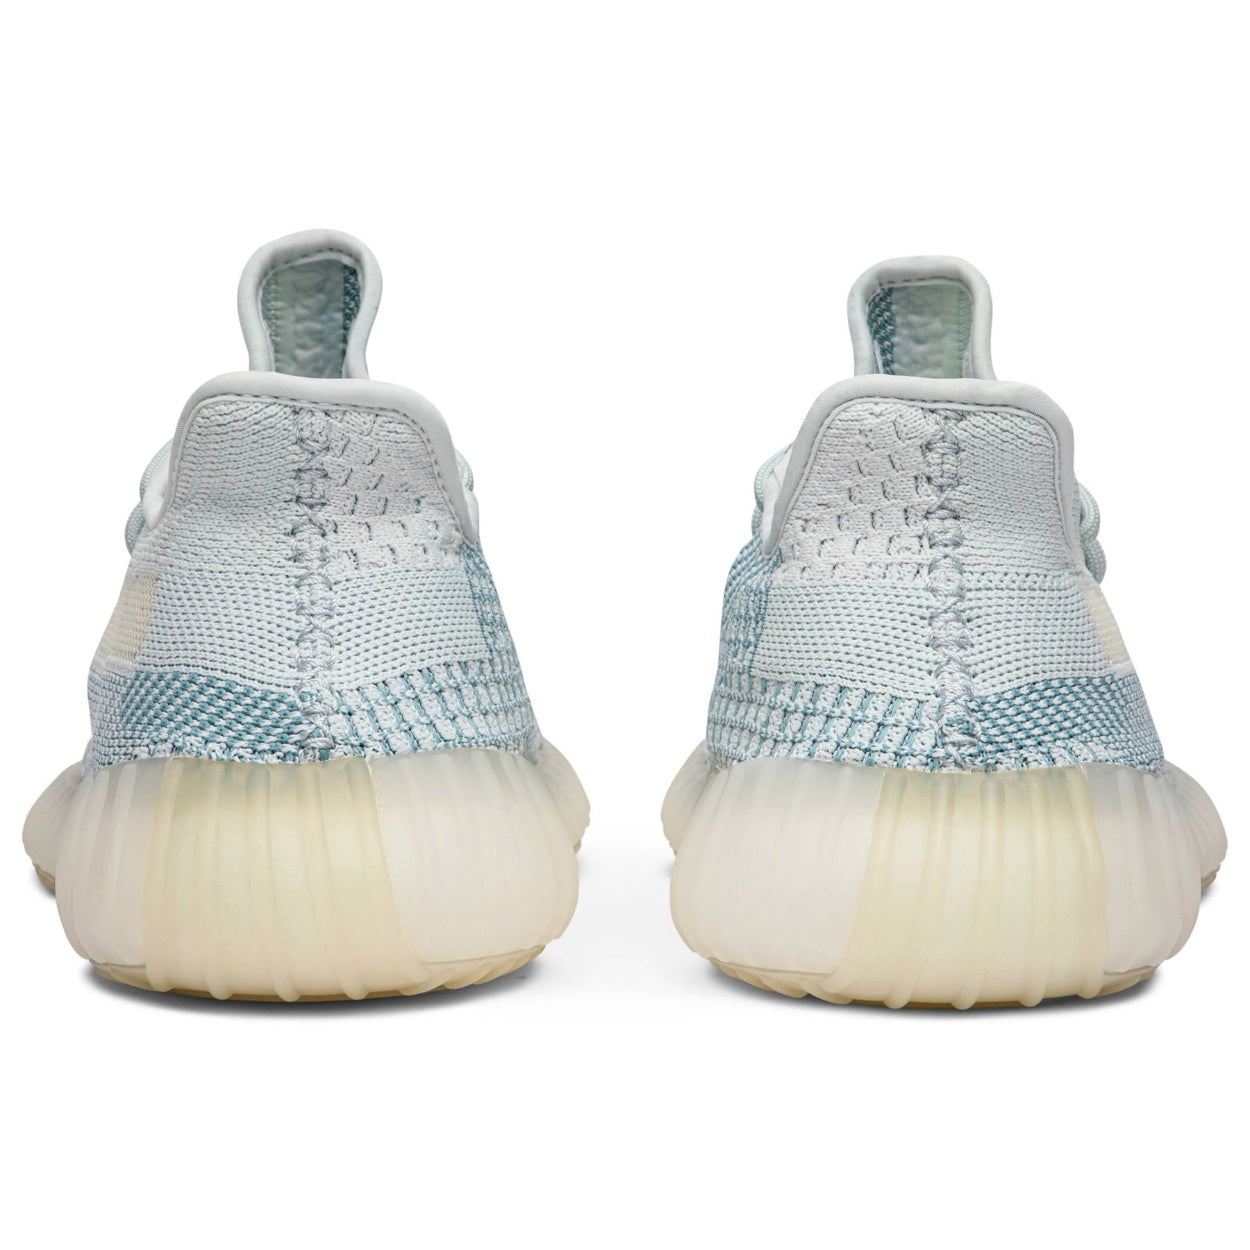 adidas Yeezy Boost 350 V2 'Cloud White Reflective' - After Burn